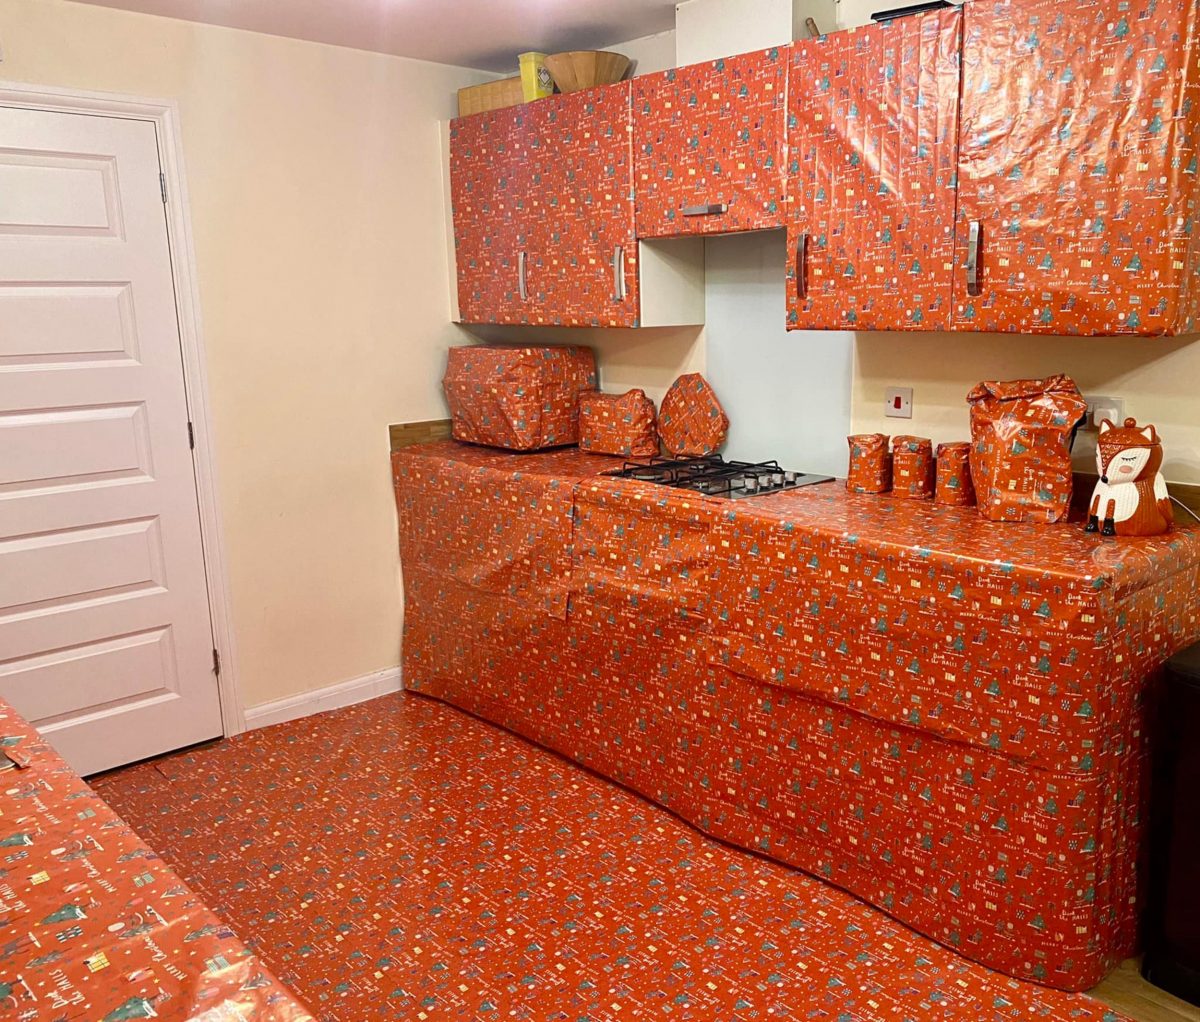 The kitchen wrapped in Christmas paper as part of the Elf on the Shelf plan.